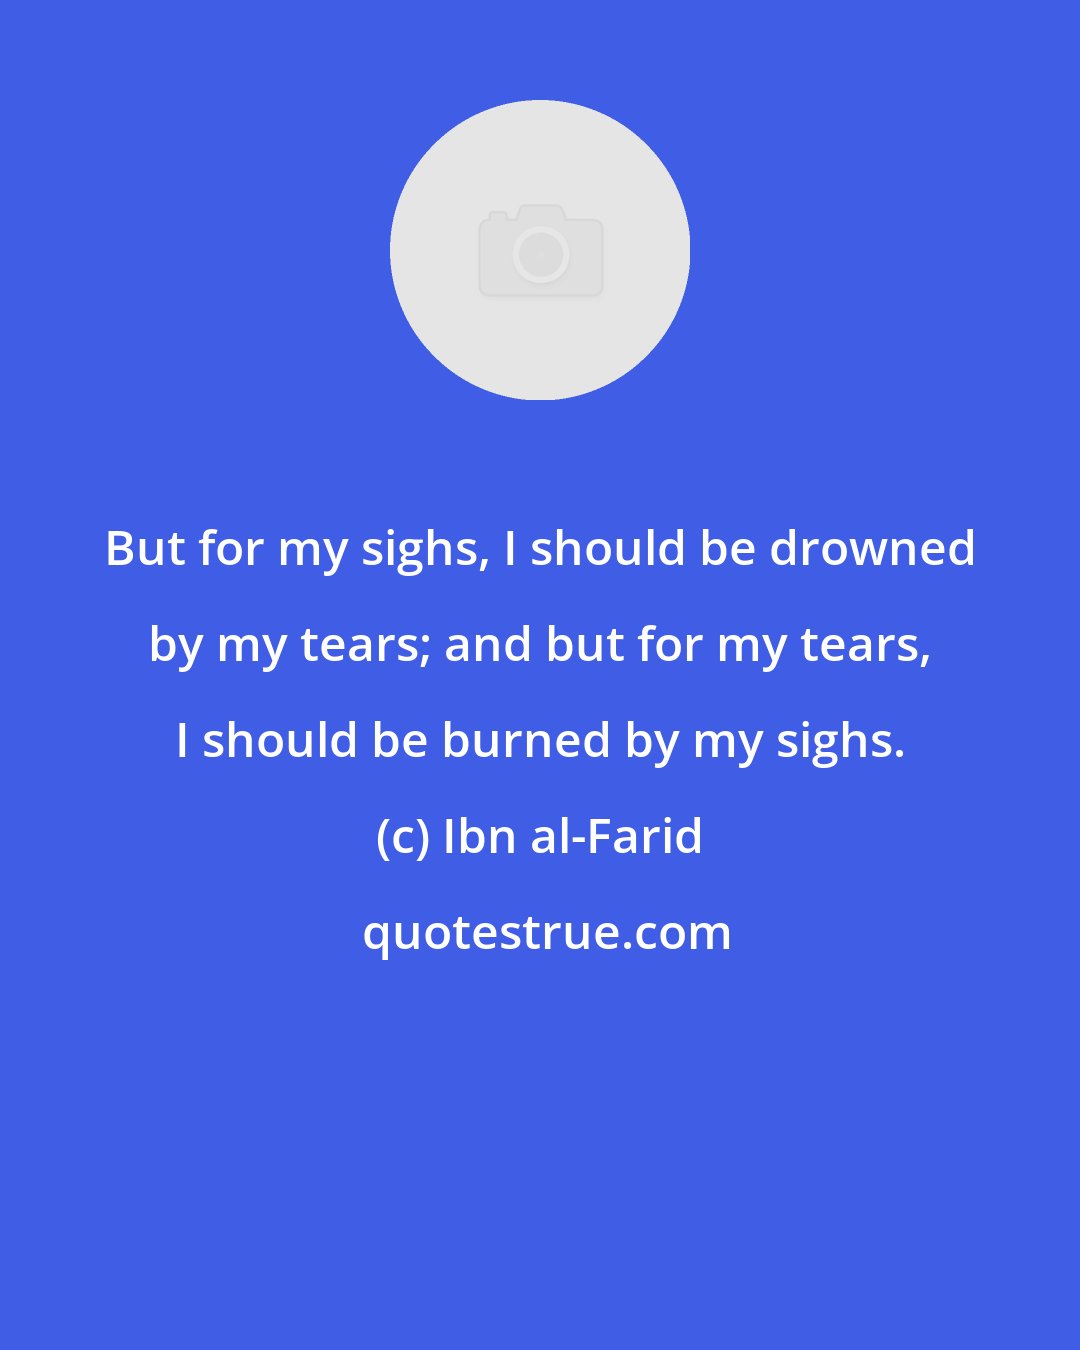 Ibn al-Farid: But for my sighs, I should be drowned by my tears; and but for my tears, I should be burned by my sighs.